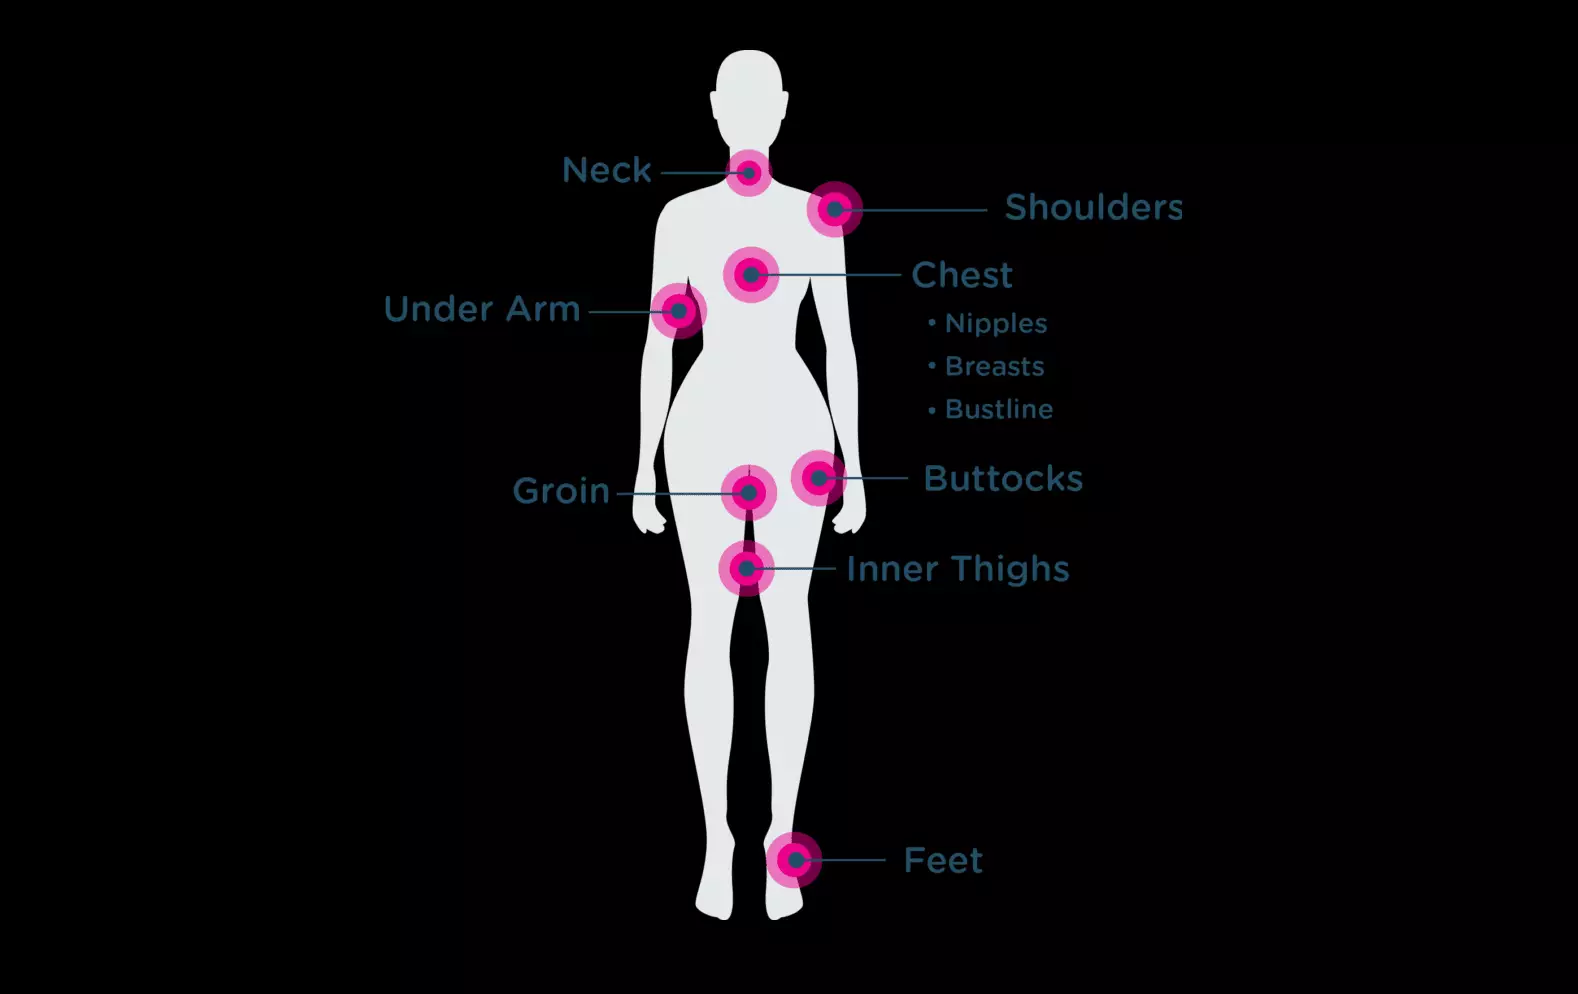 This graphic shows all the different places the chafing balm can be used